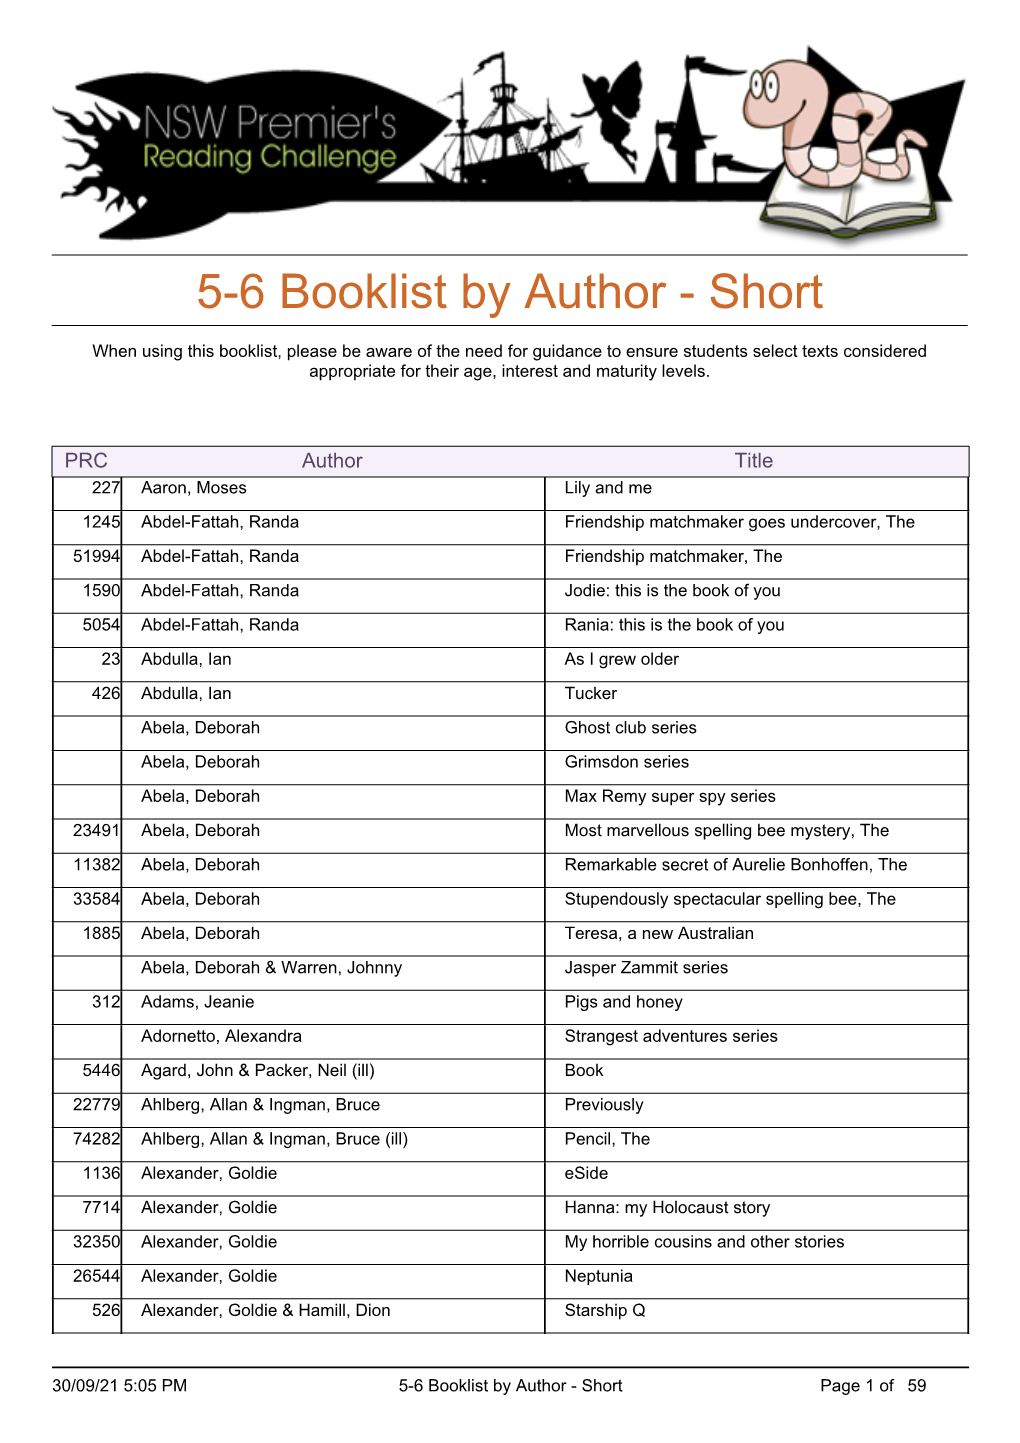 5-6 Booklist by Author - Short